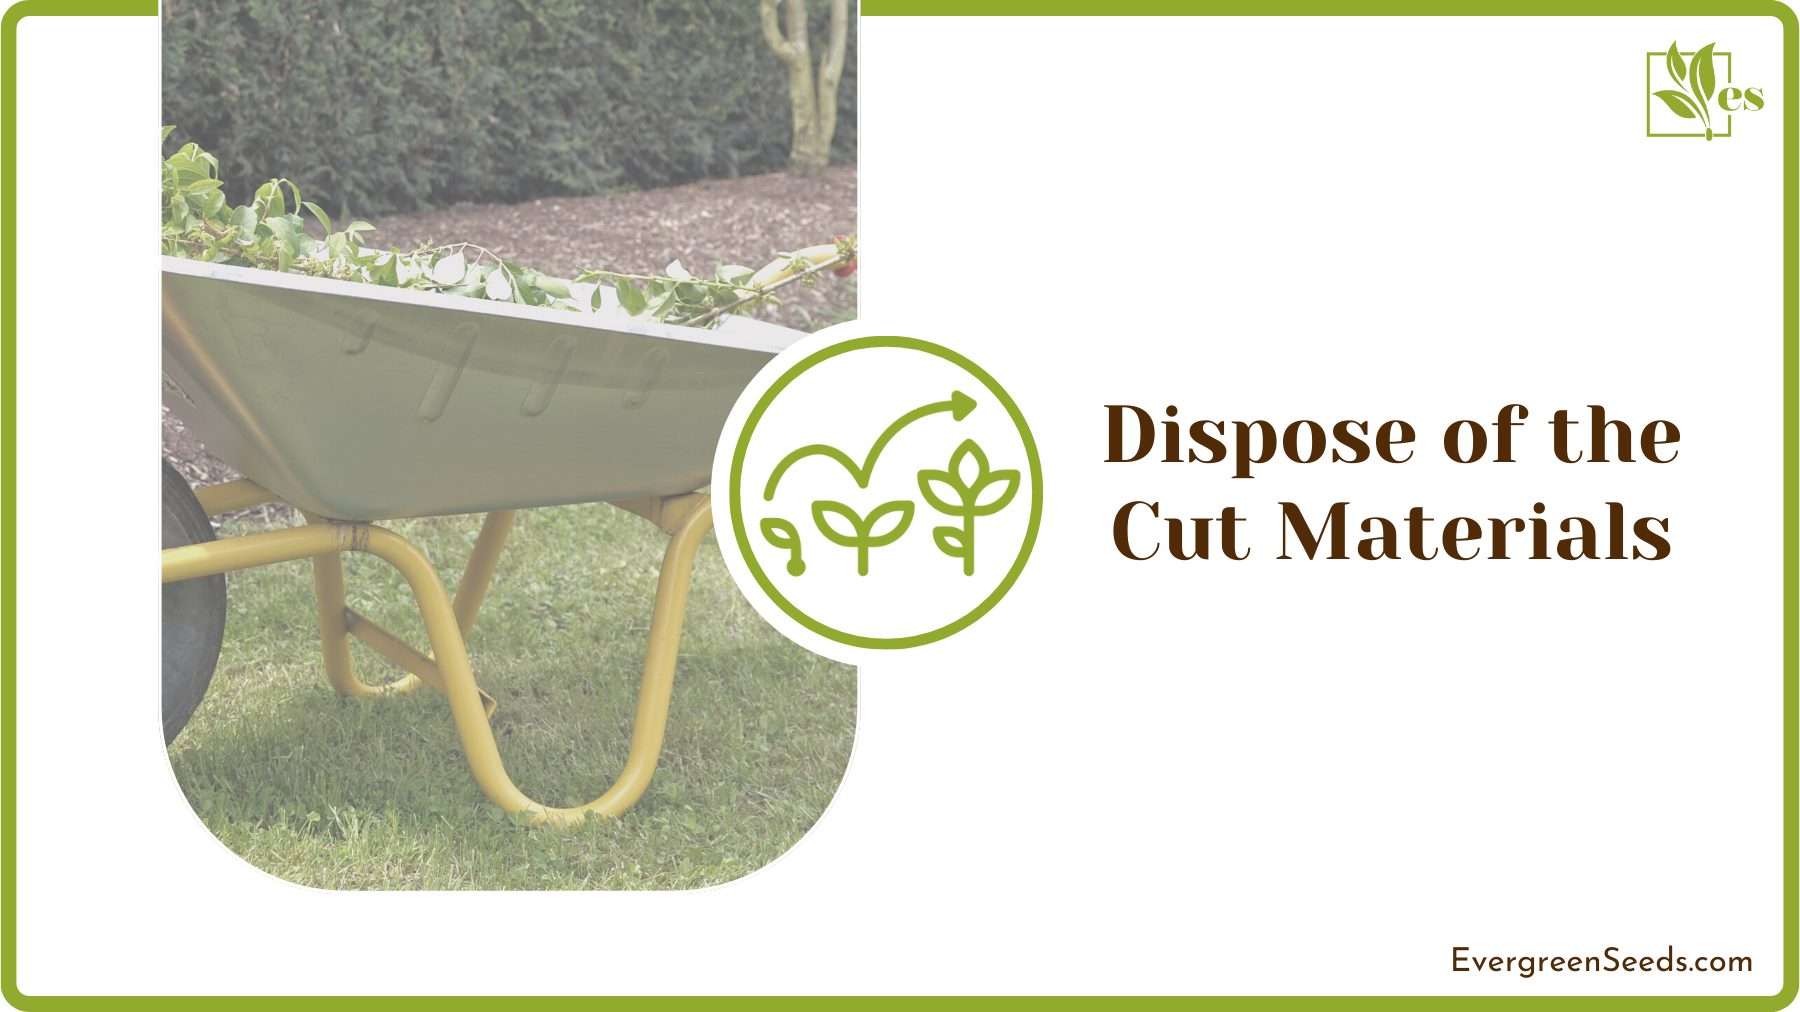 Disposing of Plant Waste